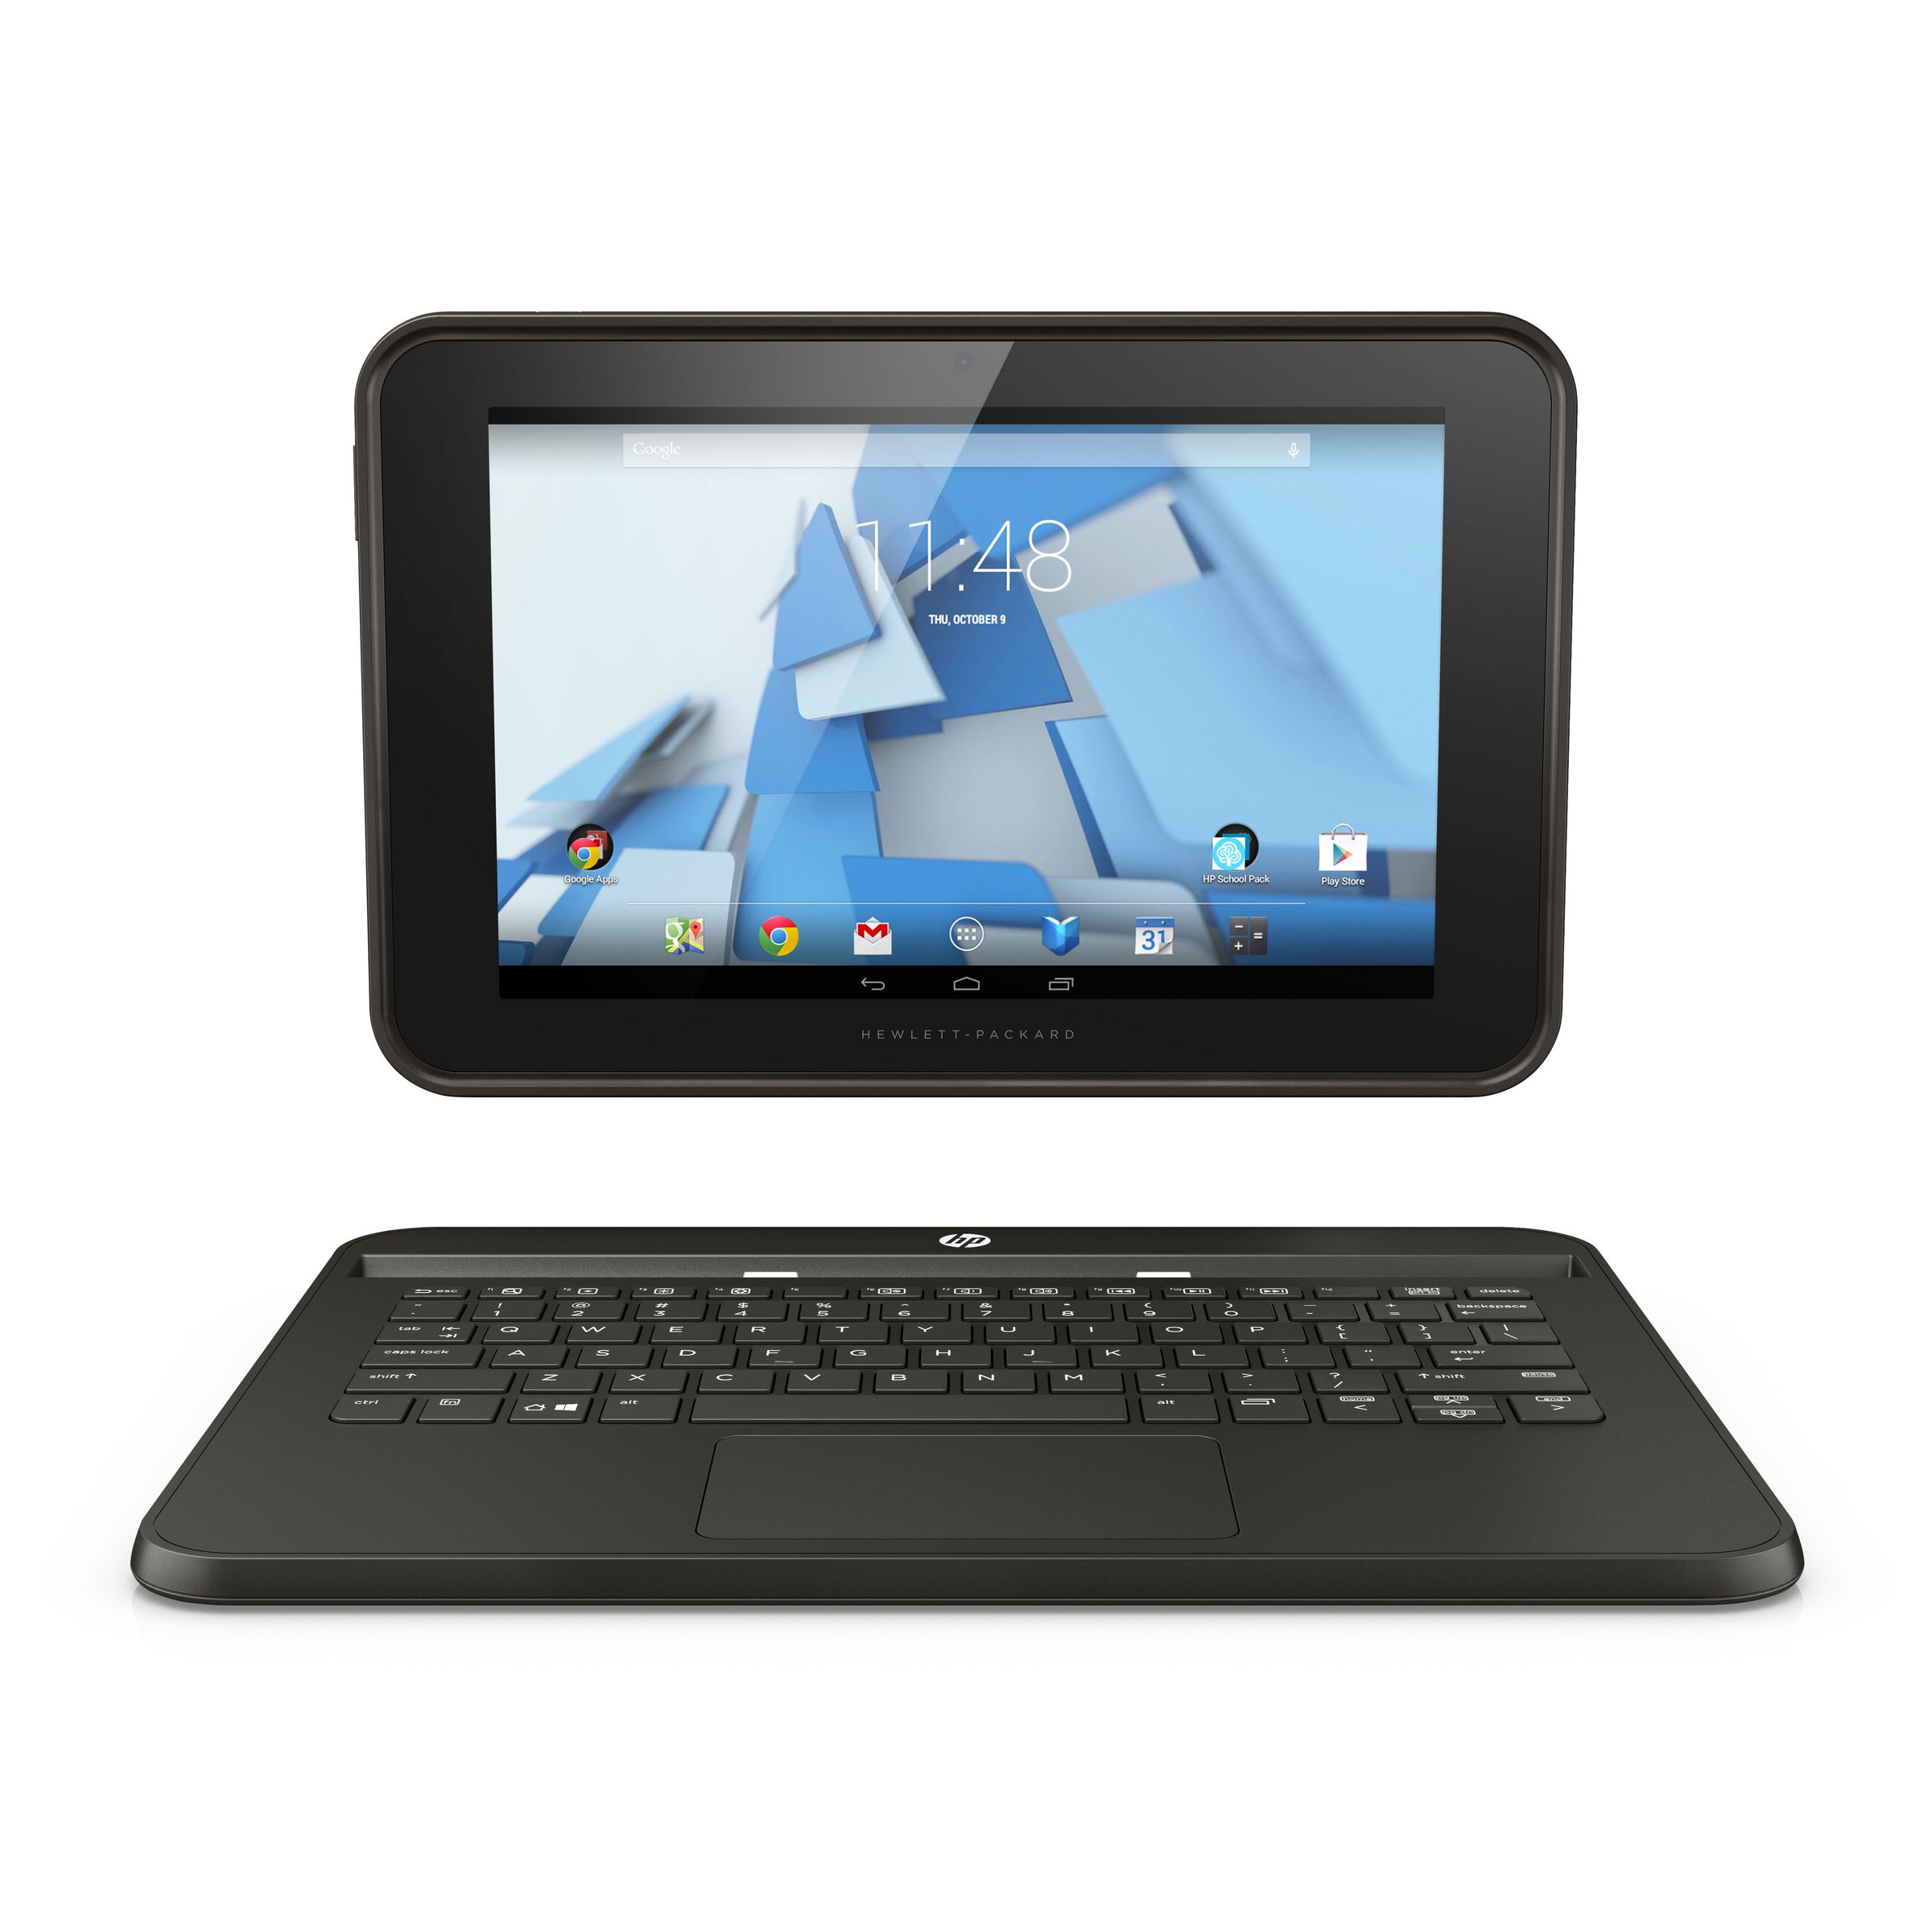 HP Windows 8 and Android tablets